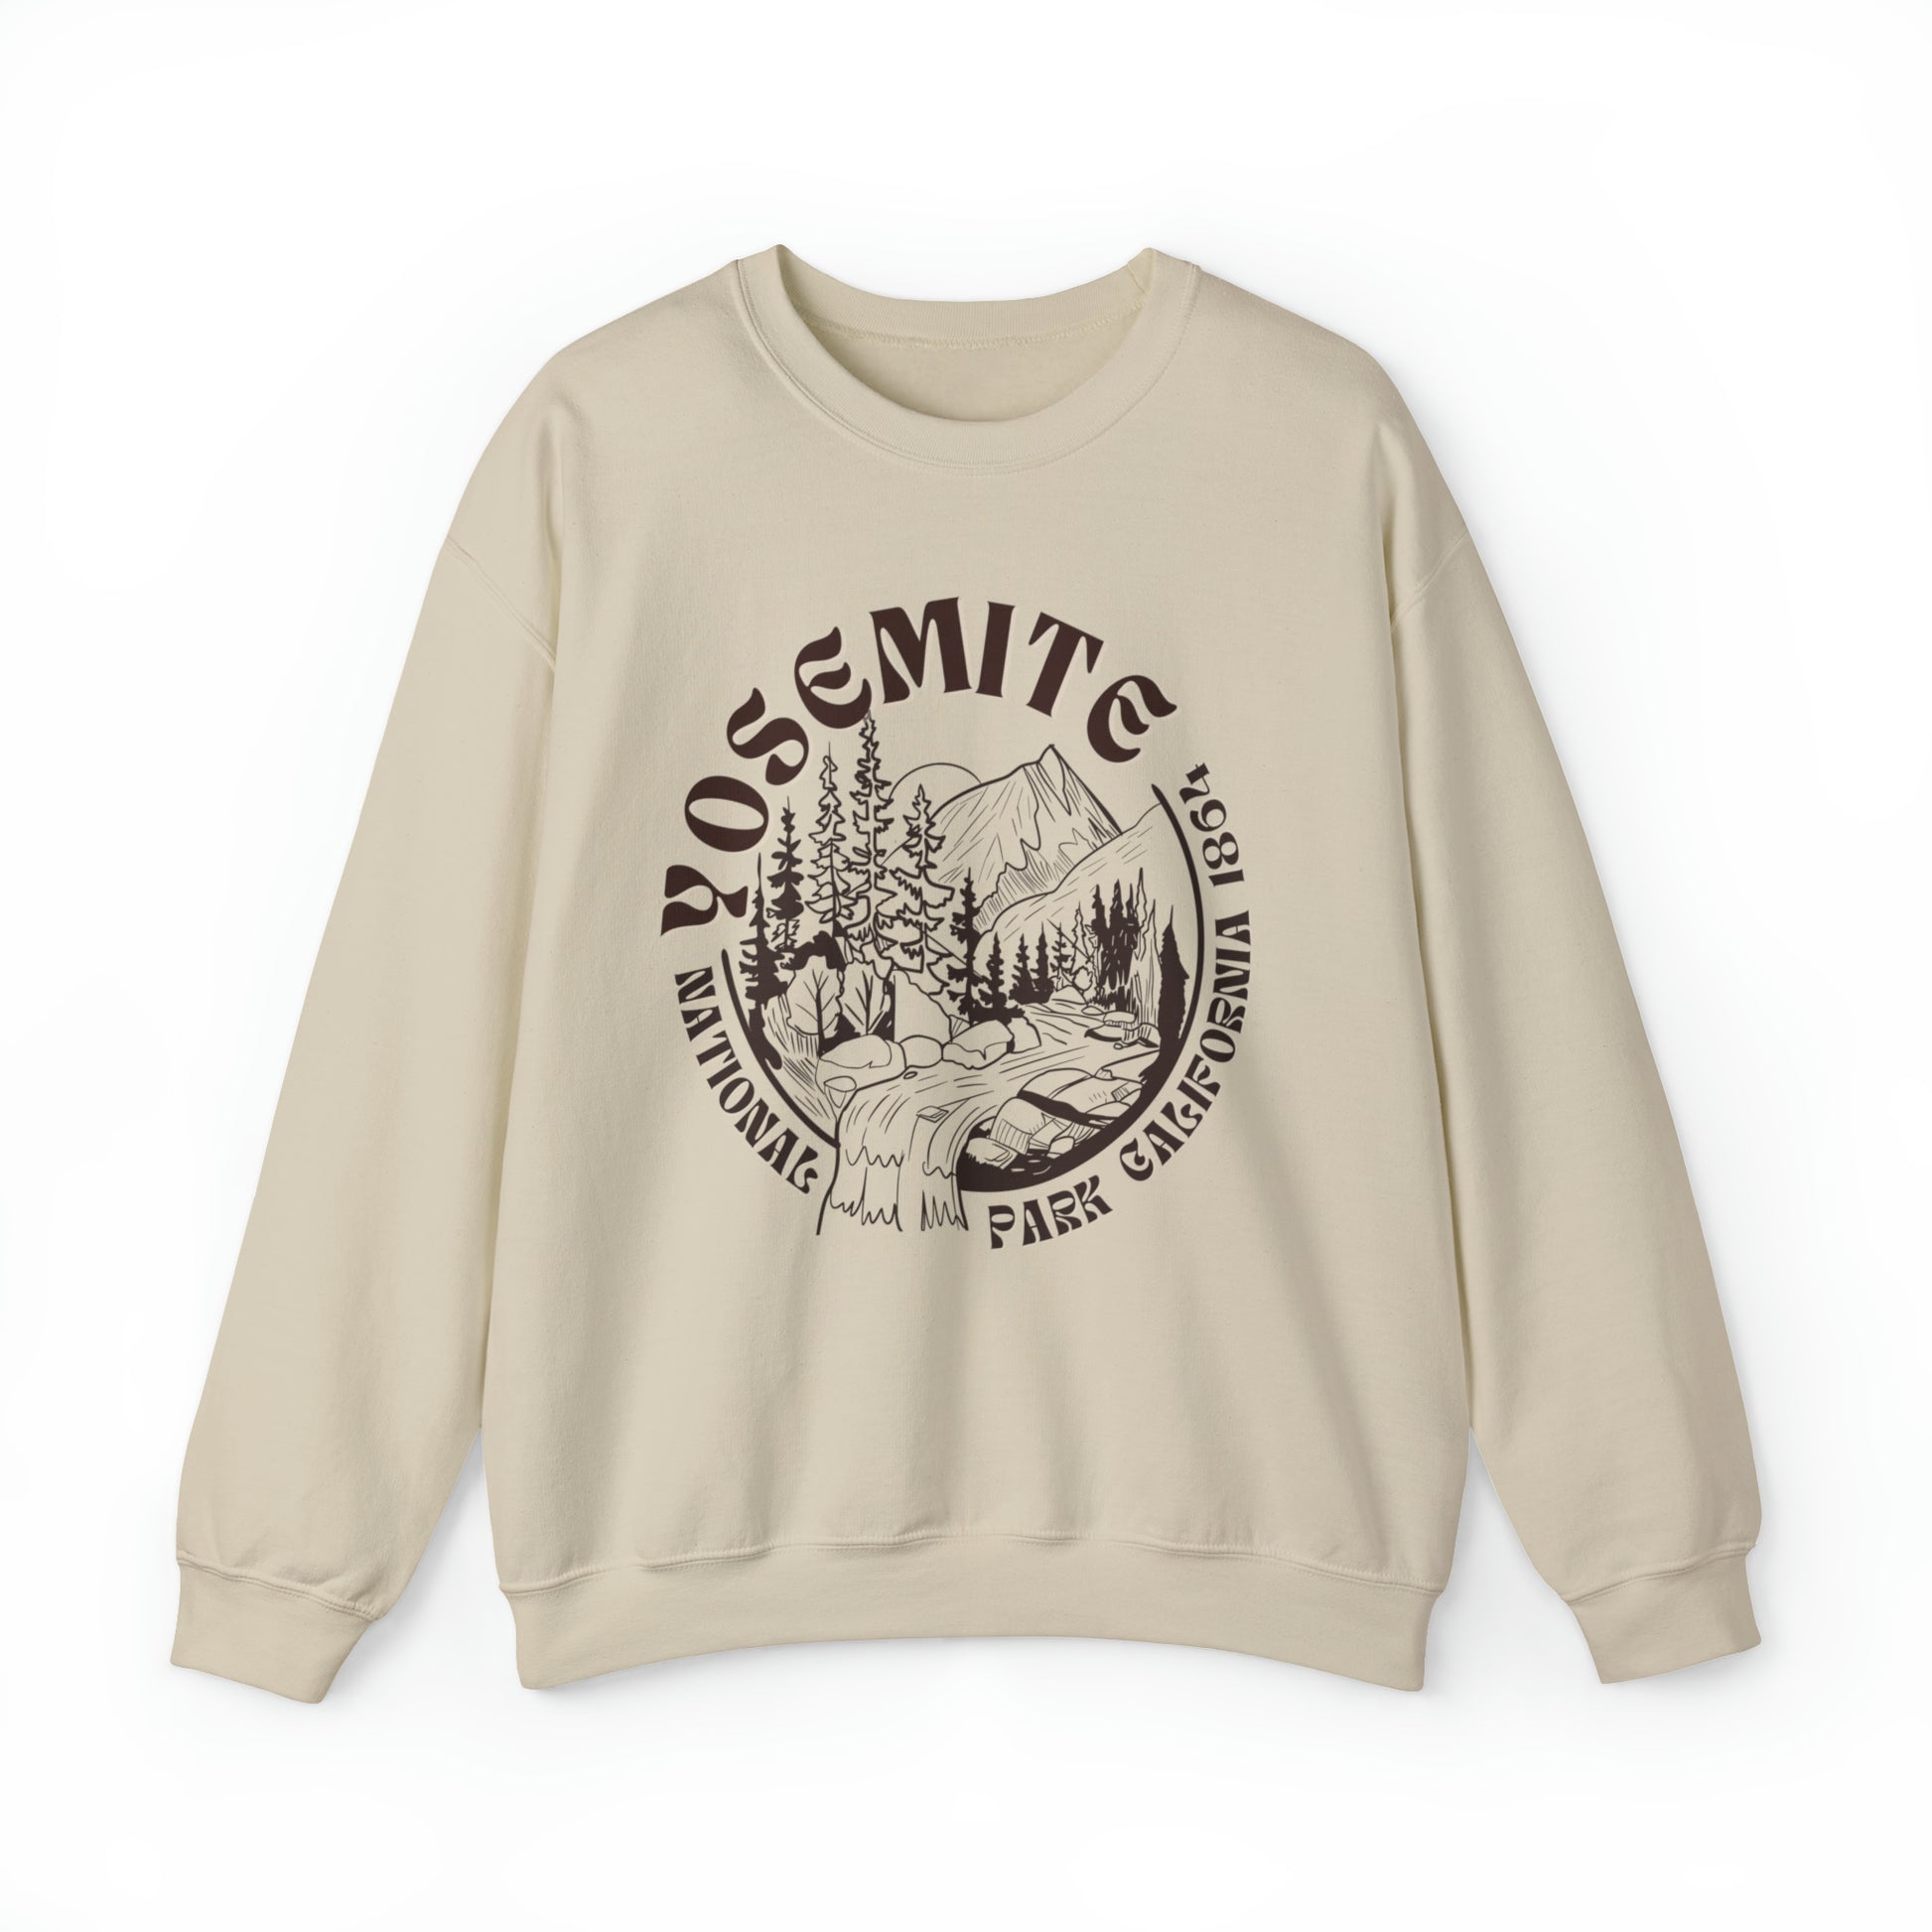 Yosemite National Park SweatshirtBring the wilderness of Yosemite National Park and California style into your wardrobe with this vintage styled boyfriend sweatshirt inspired by the natural beauty o